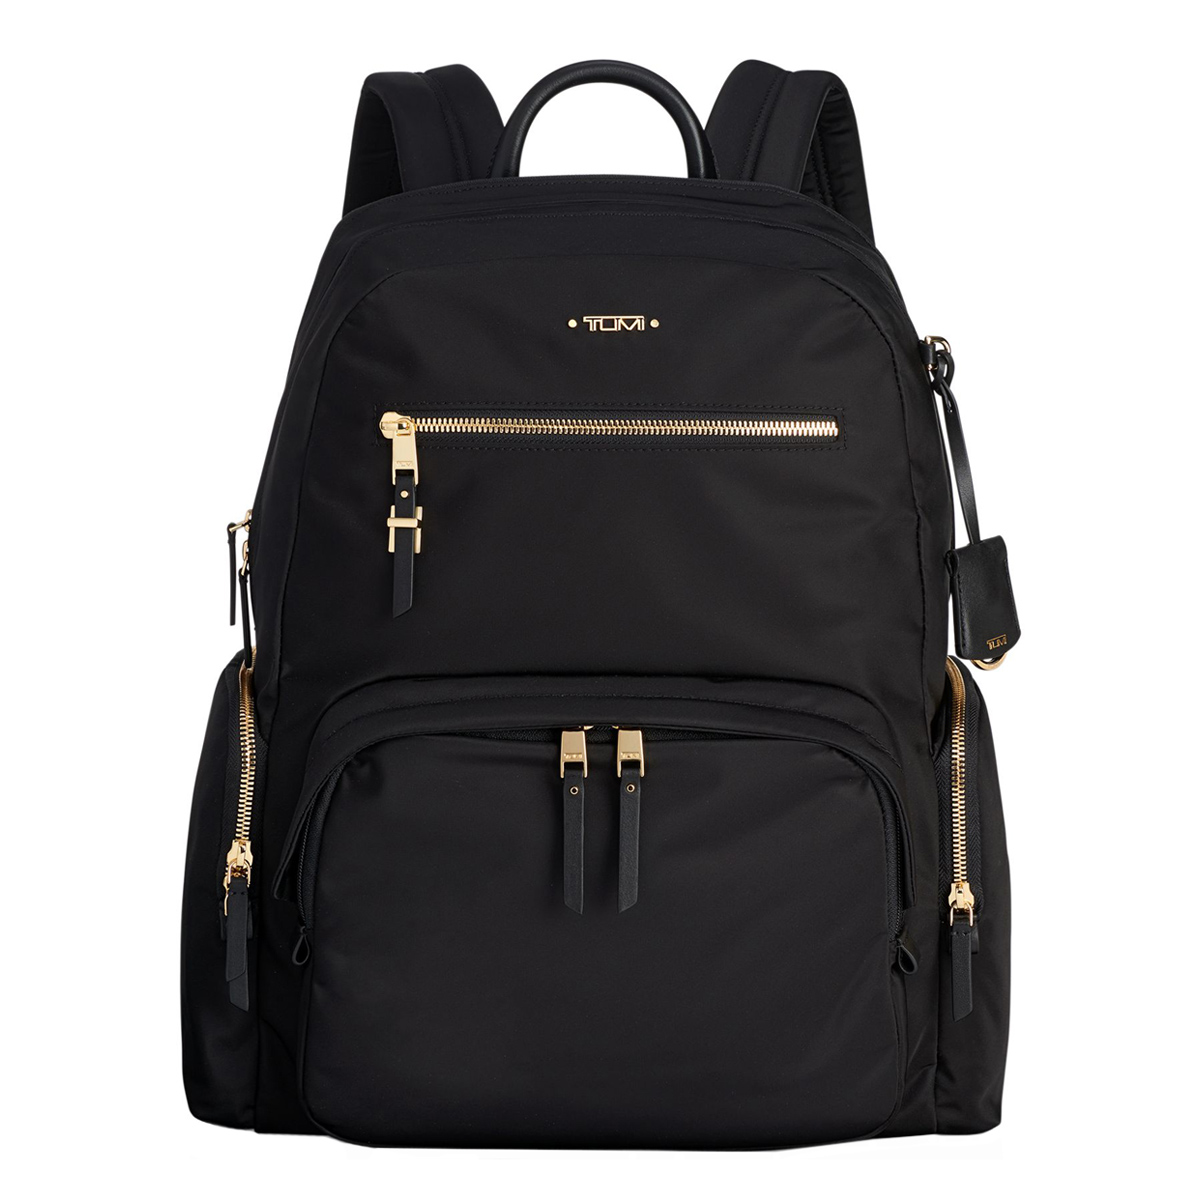 Black backpack with gold zippers